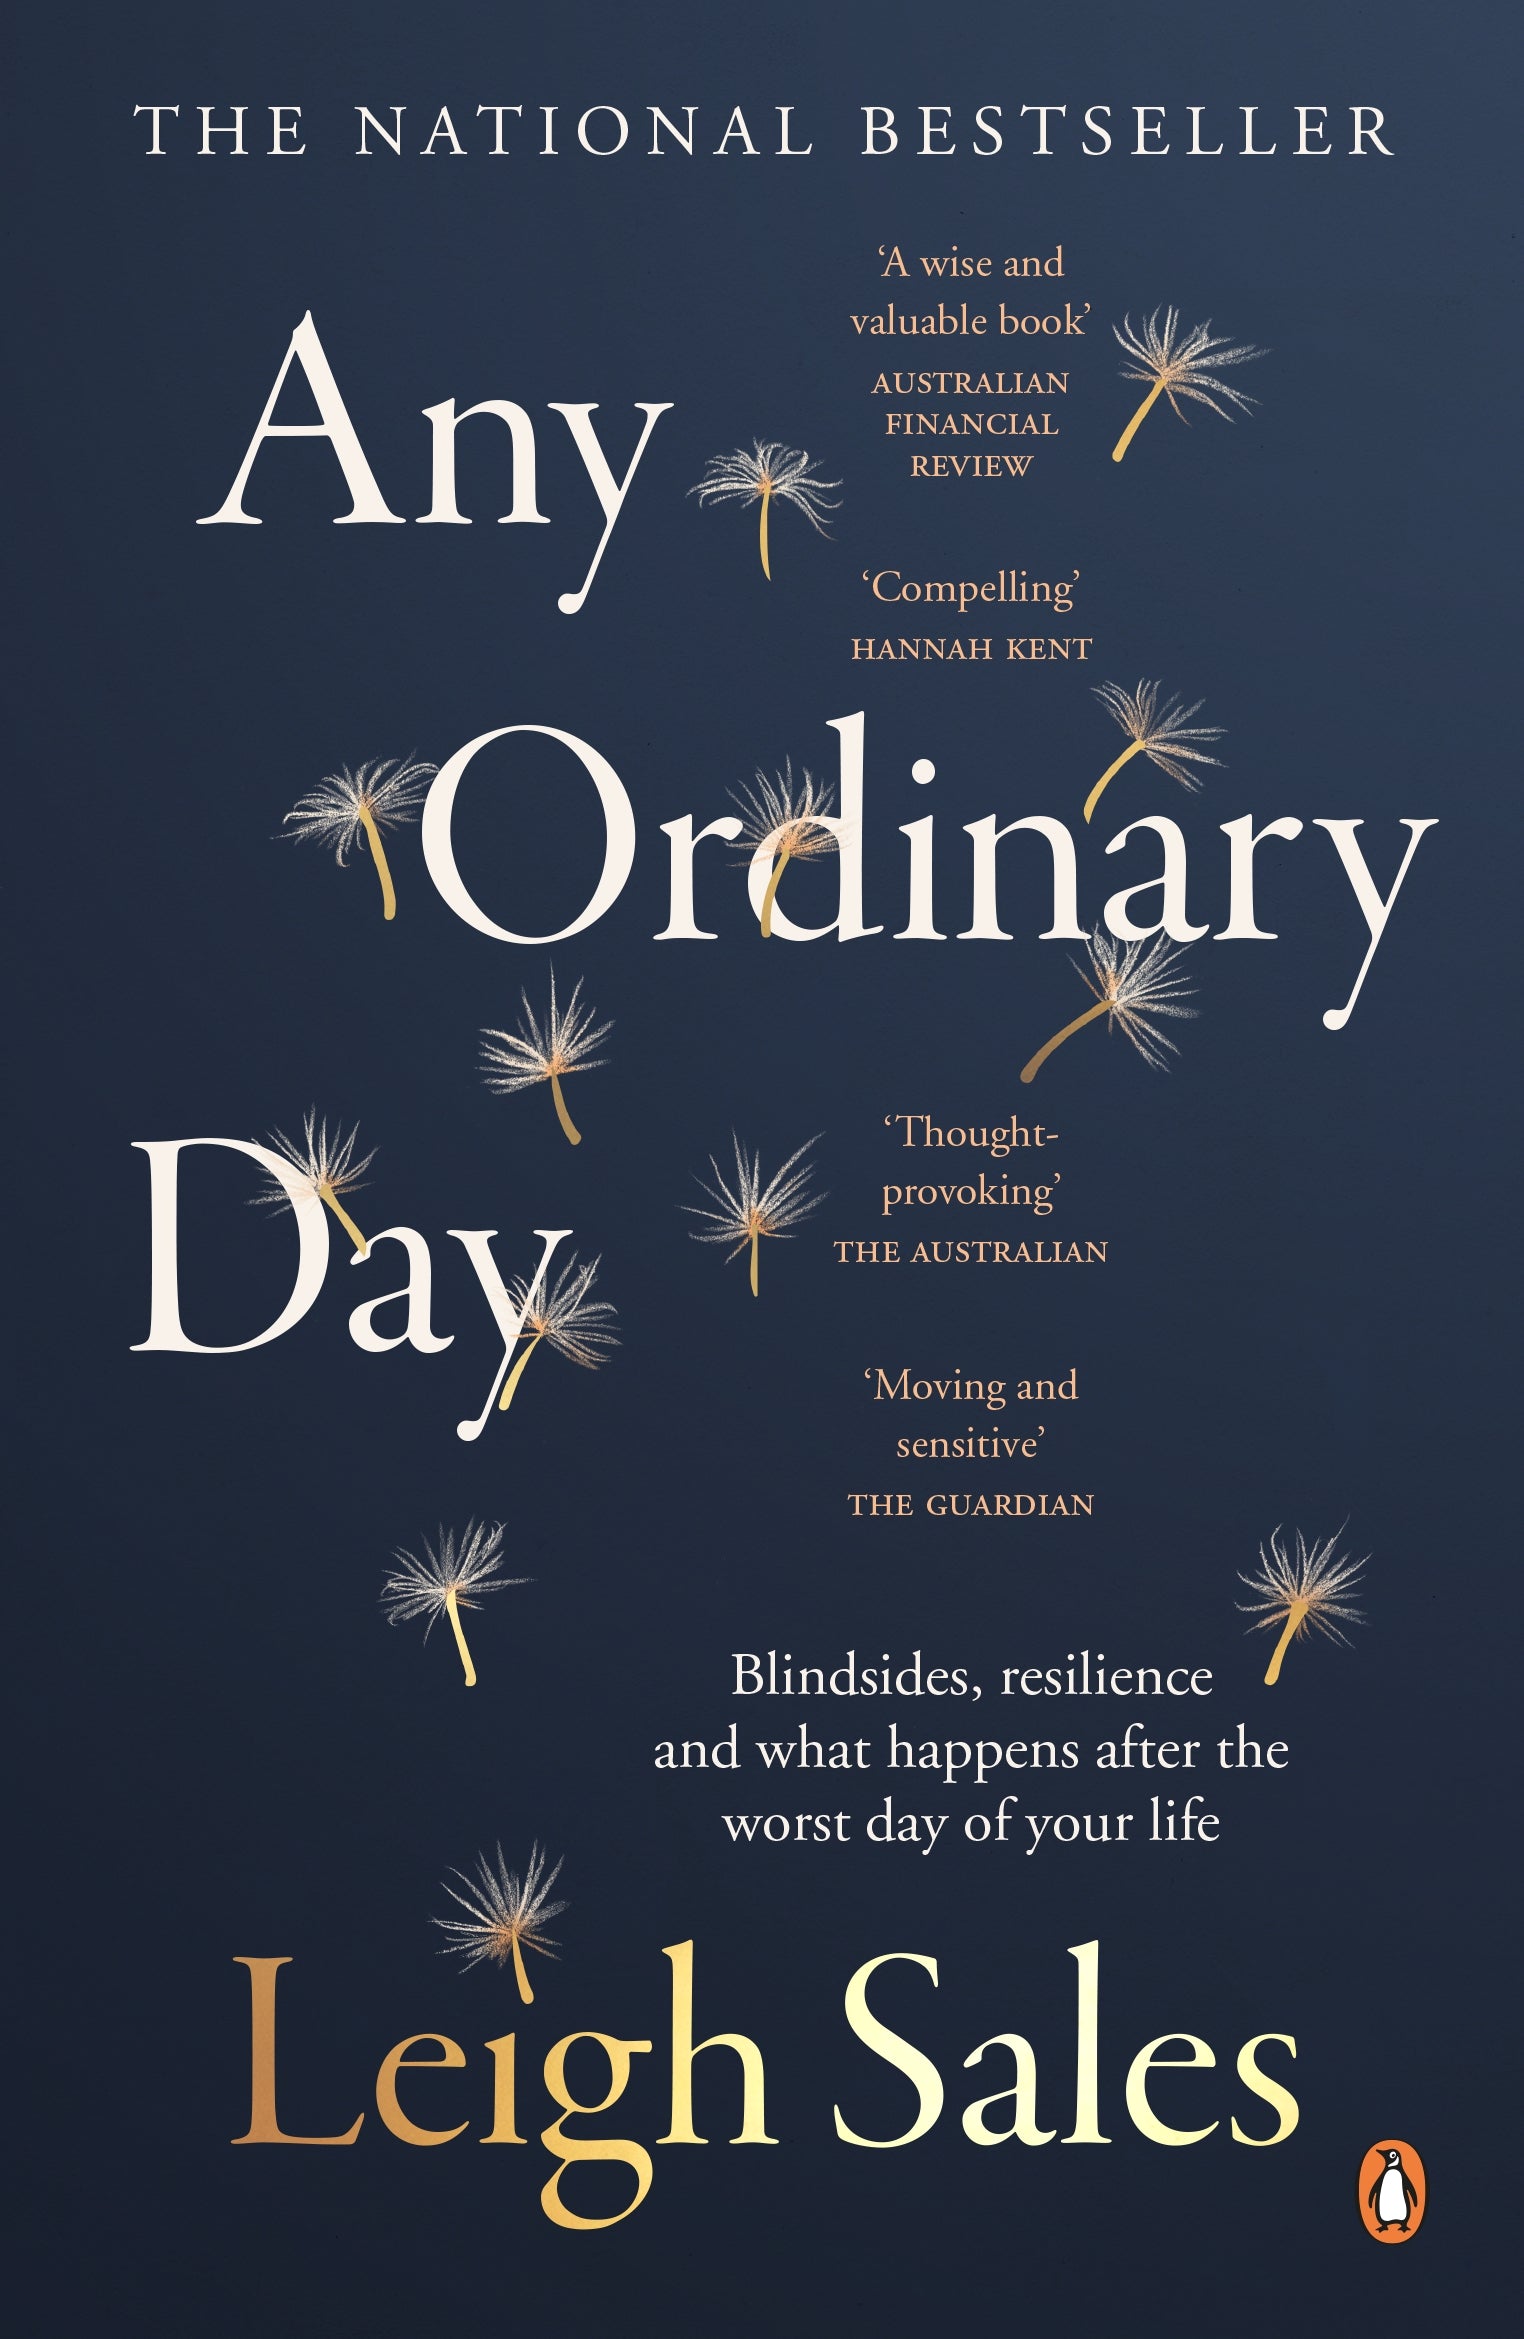 Any ordinary day by Leigh Sales